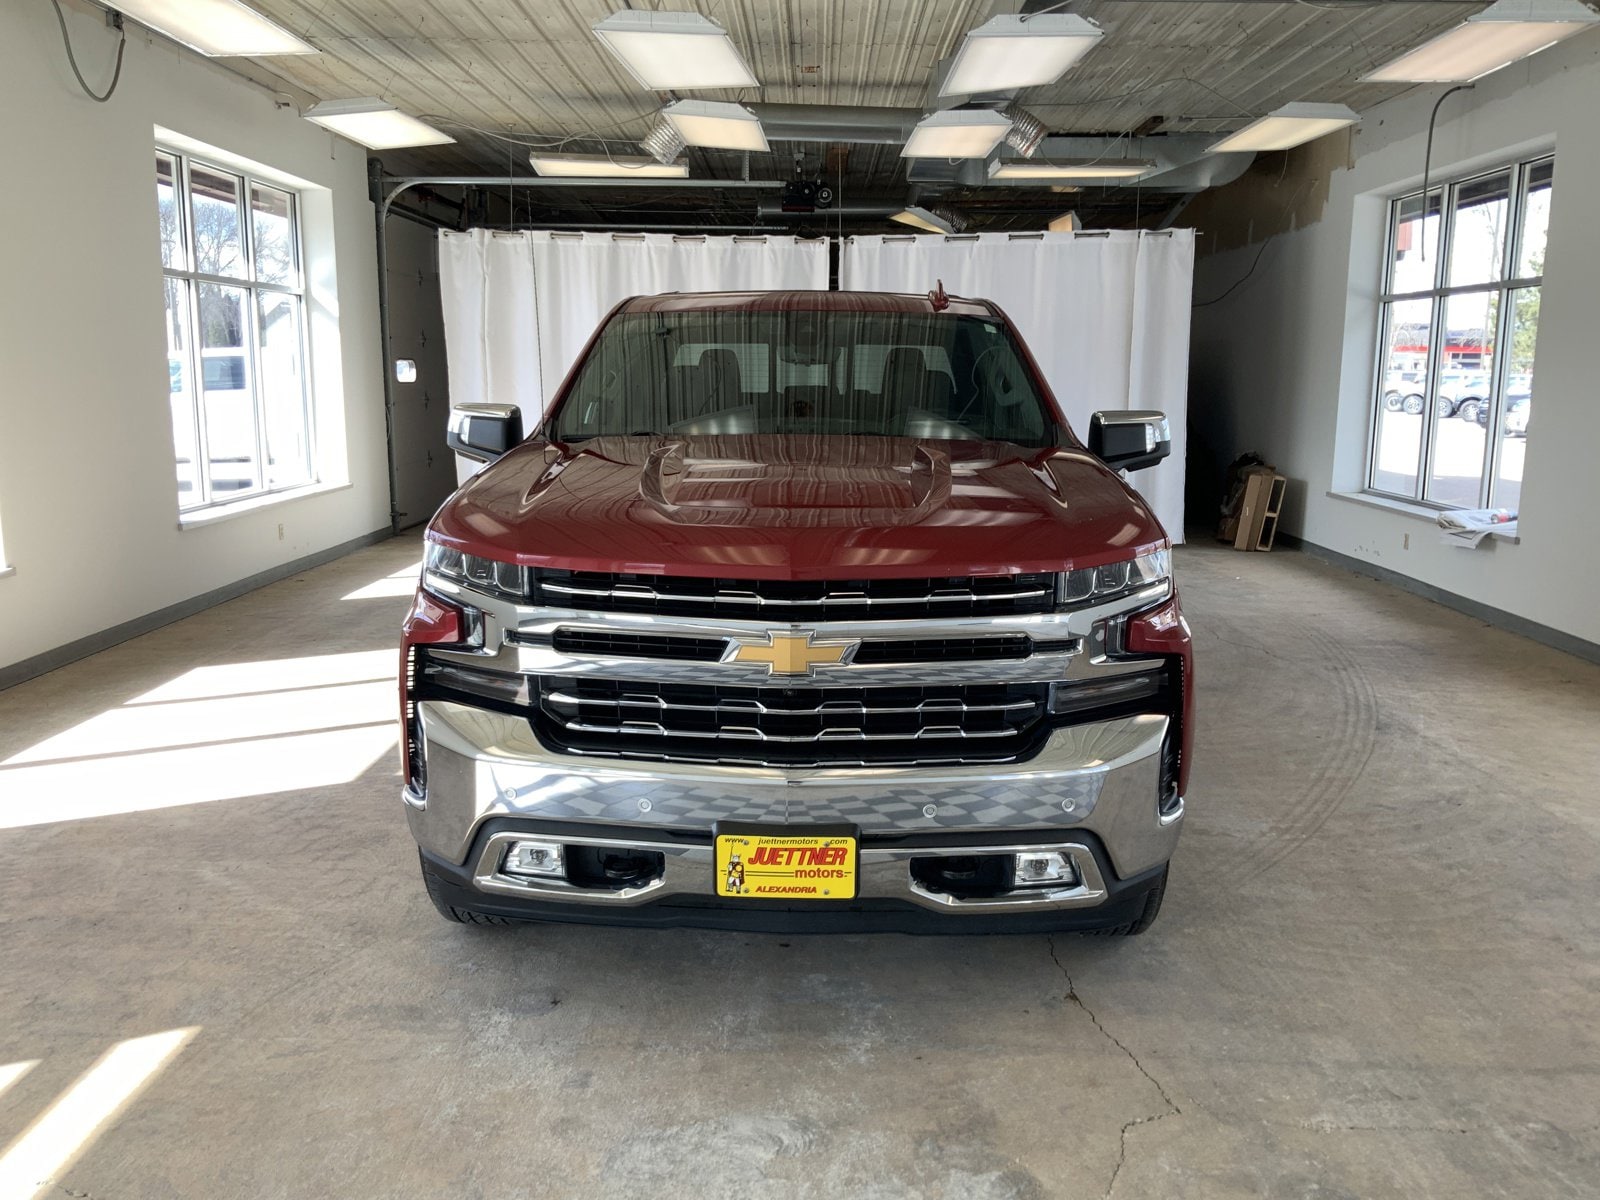 Used 2019 Chevrolet Silverado 1500 LTZ with VIN 3GCUYGED8KG167946 for sale in Alexandria, Minnesota